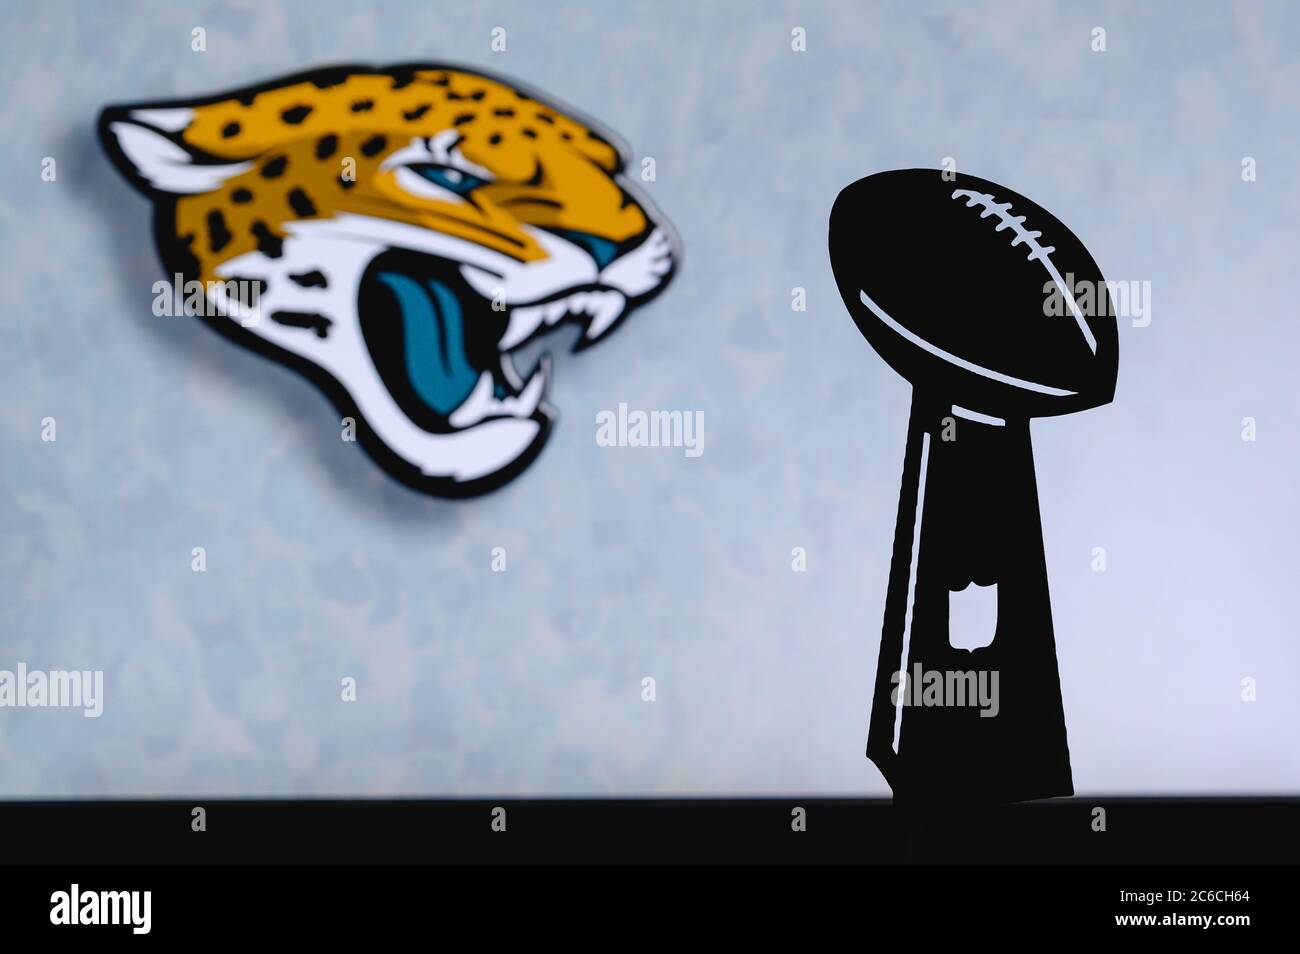 Jacksonville Jaguars professional american football club, silhouette of NFL trophy, logo of the club in background. Stock Photo